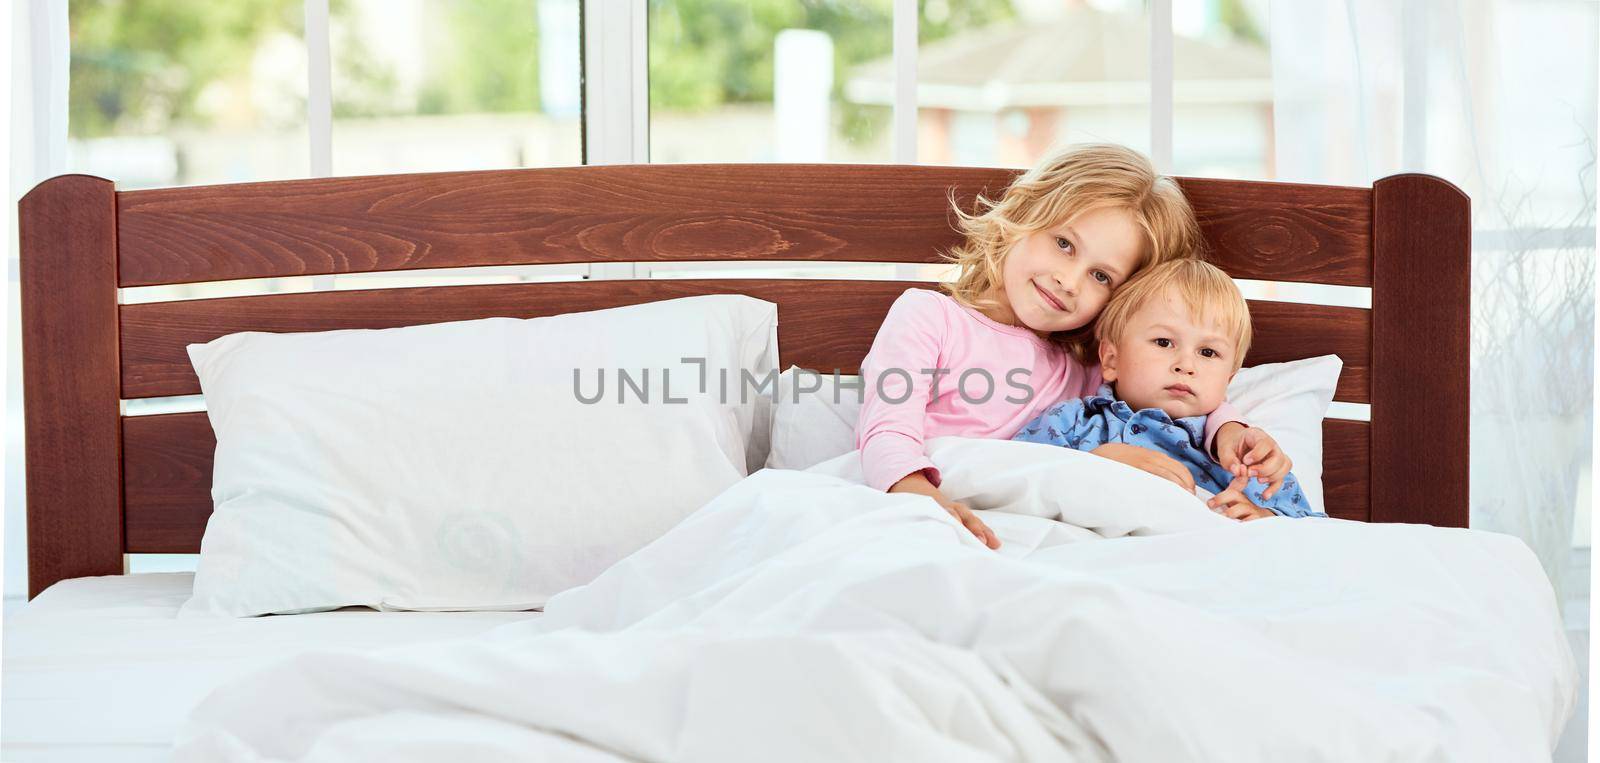 Staying home. Cute little brother and sister in pajamas and looking at camera with smile while lying together in a large bed at home by friendsstock